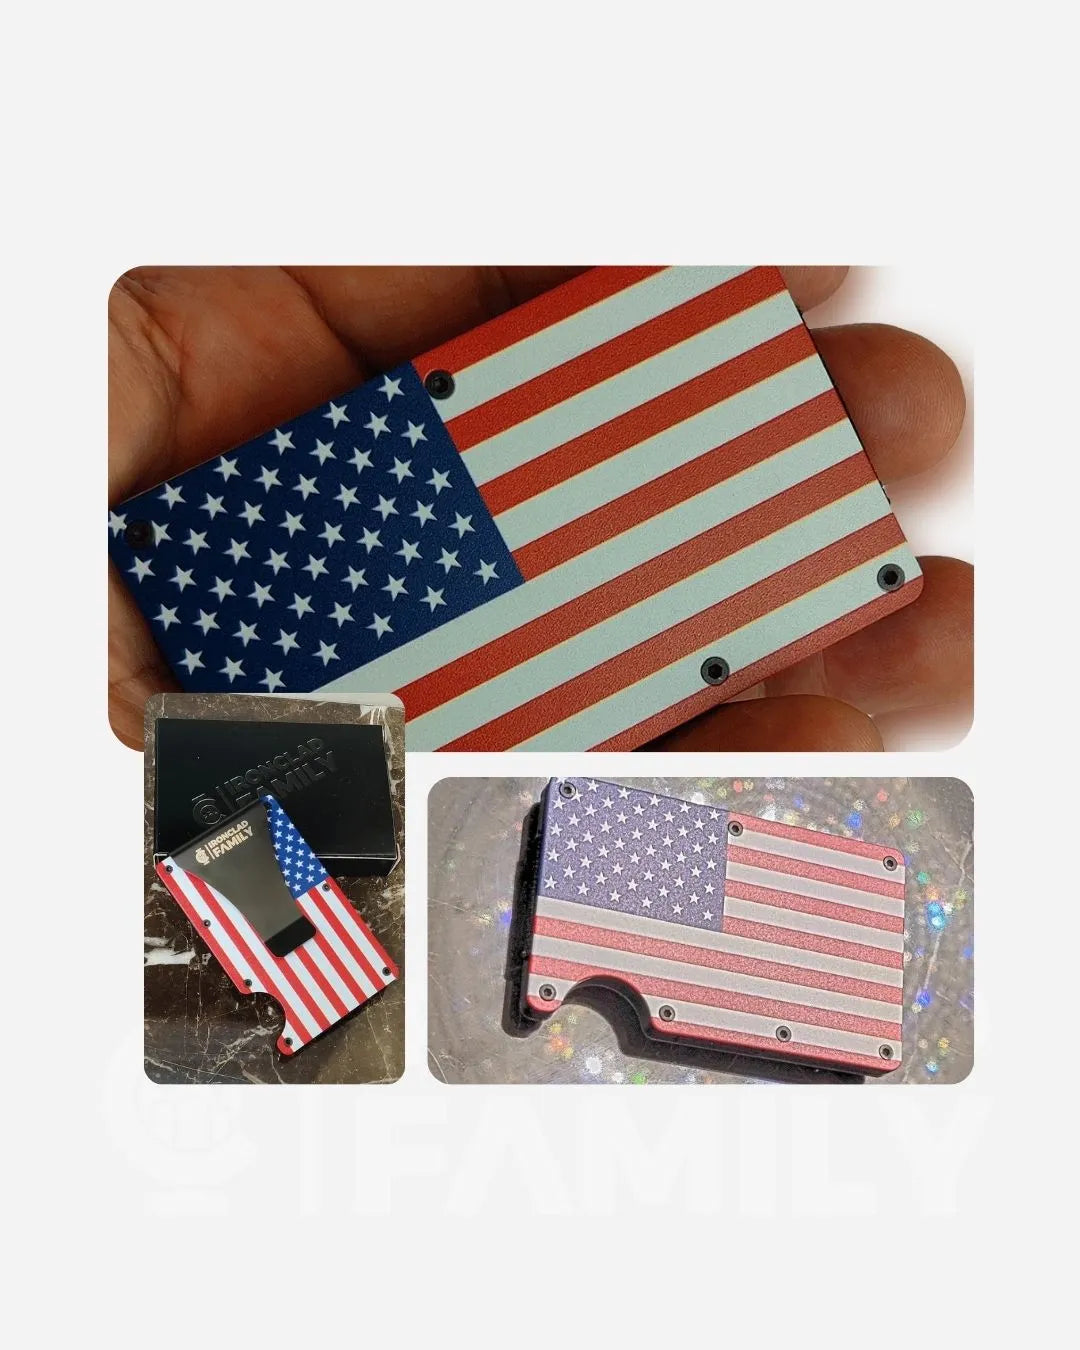 Close-up view of the American flag design on the metal wallet